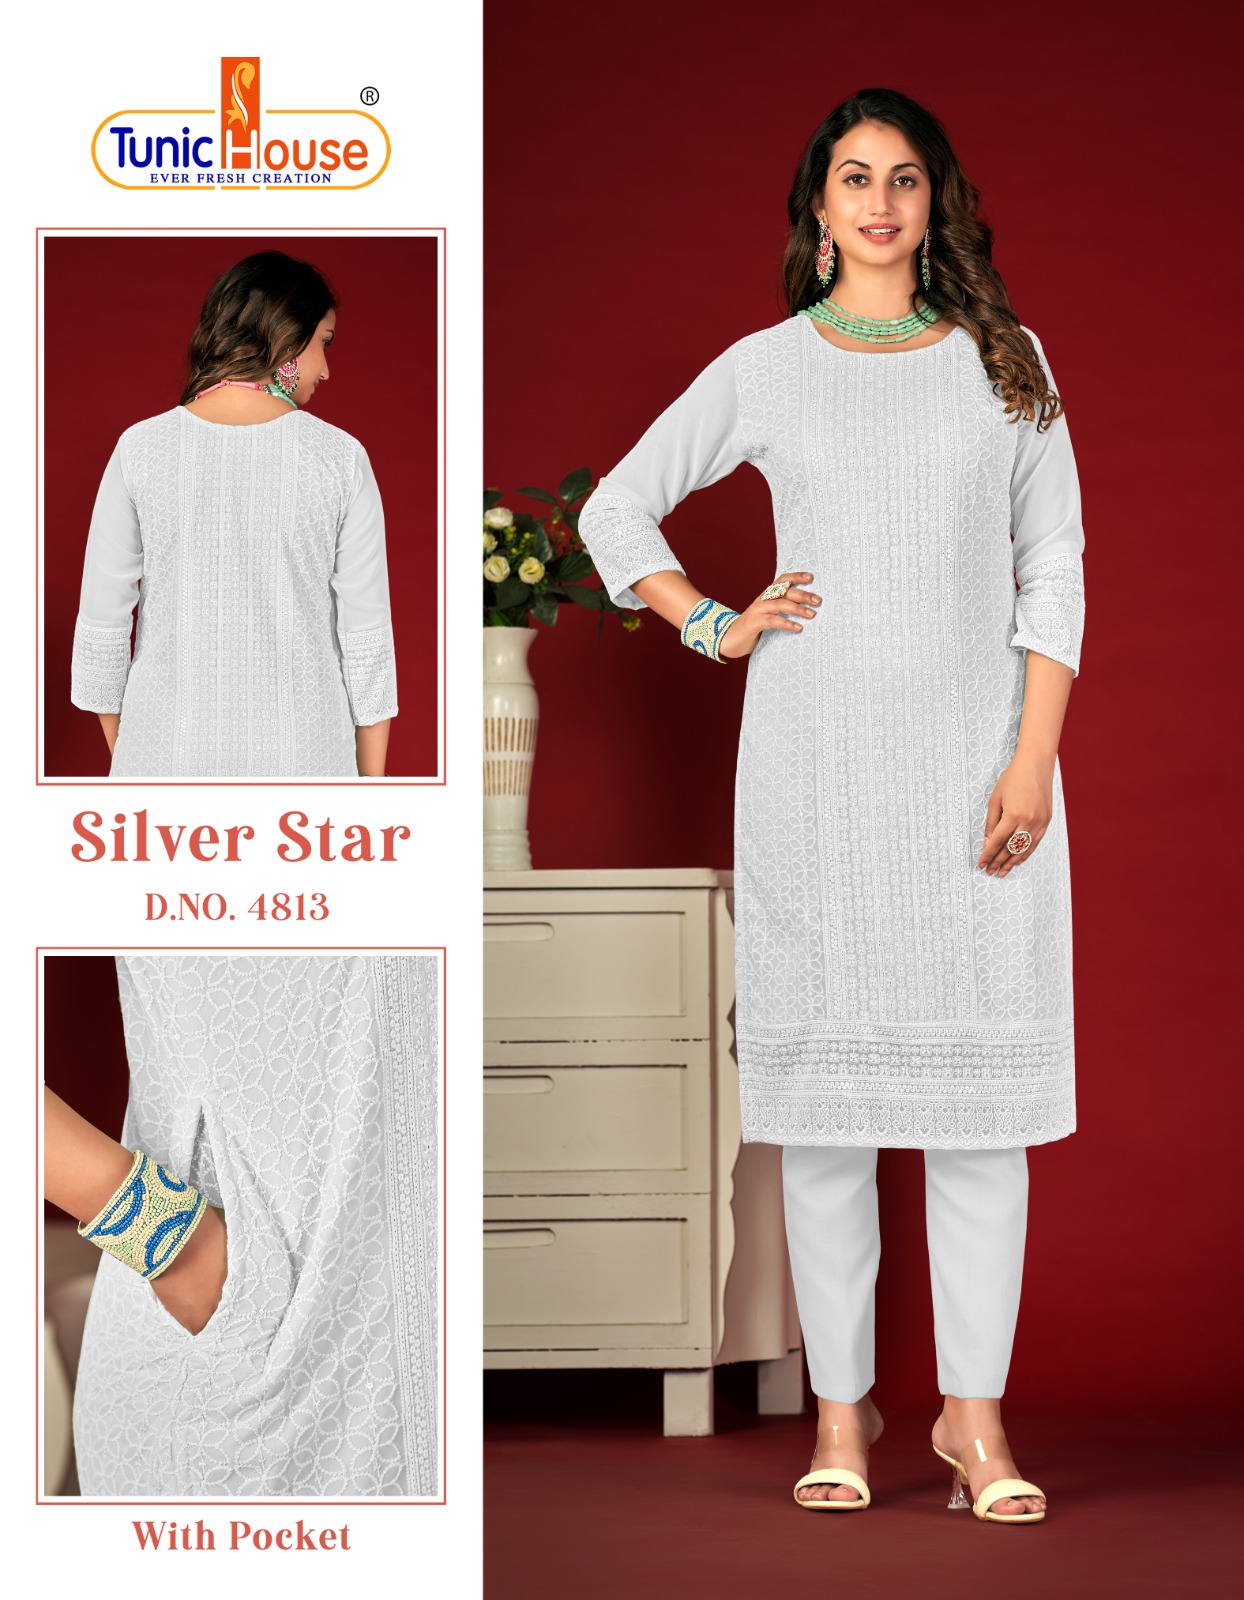 Tunic Houes Silver Star collection 1